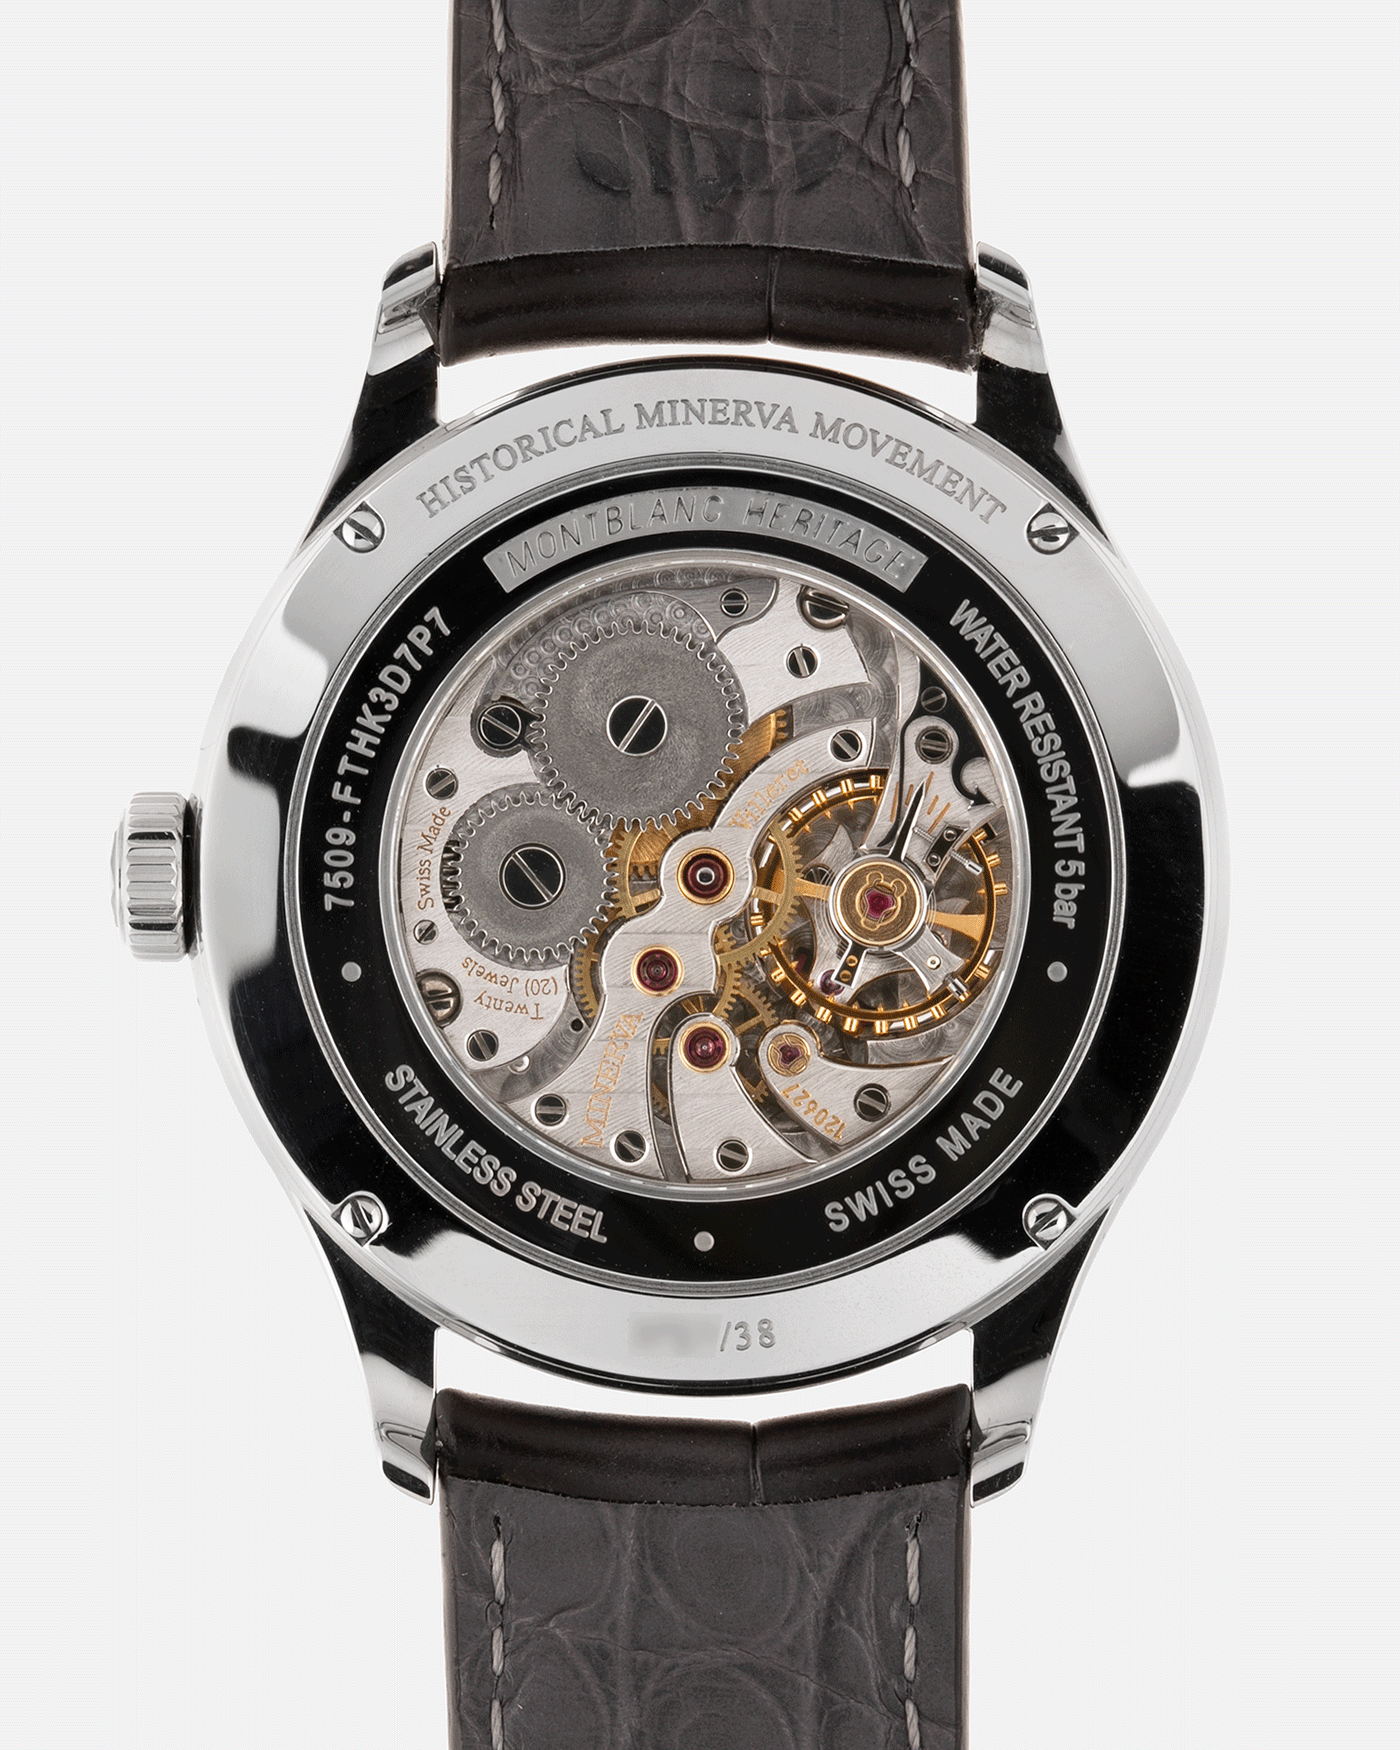 Brand: Mont Blanc Year: 2020 Model: Heritage Small Seconds Material: Stainless Steel Movement: New Old Stock Historic Minerva MB M62.00 Case Diameter: 39mm Bracelet: Mont Blanc Dark Grey Sfumato Alligator Strap with Stainless Steel Deployant